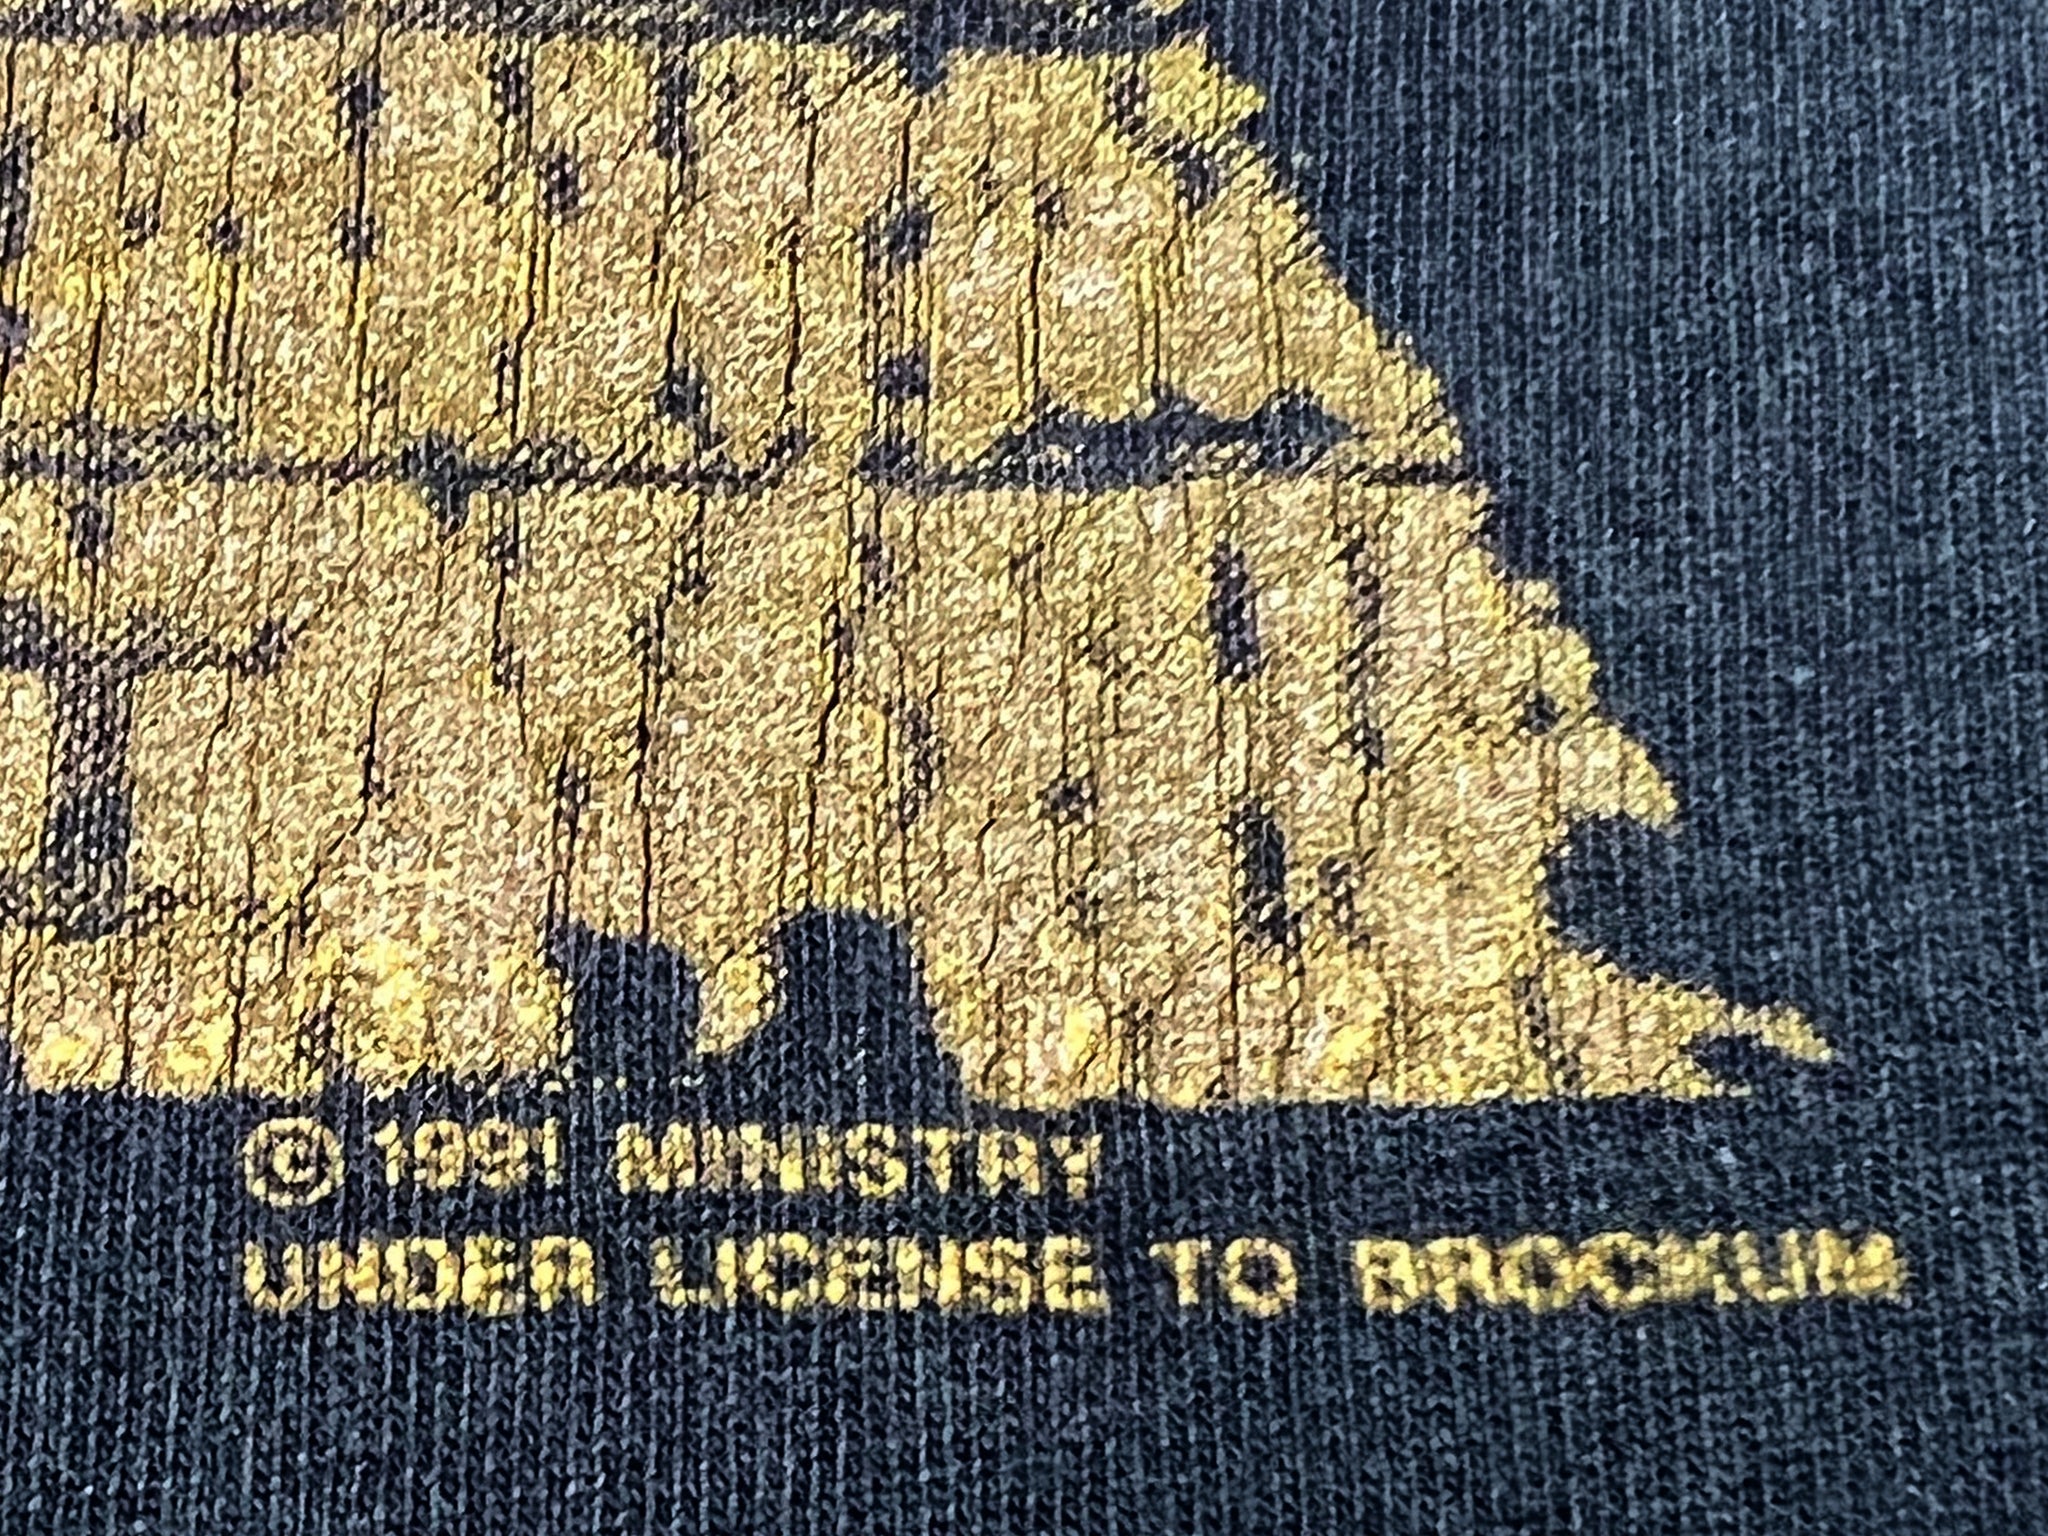 Ministry 'Psalm 69' T-Shirt